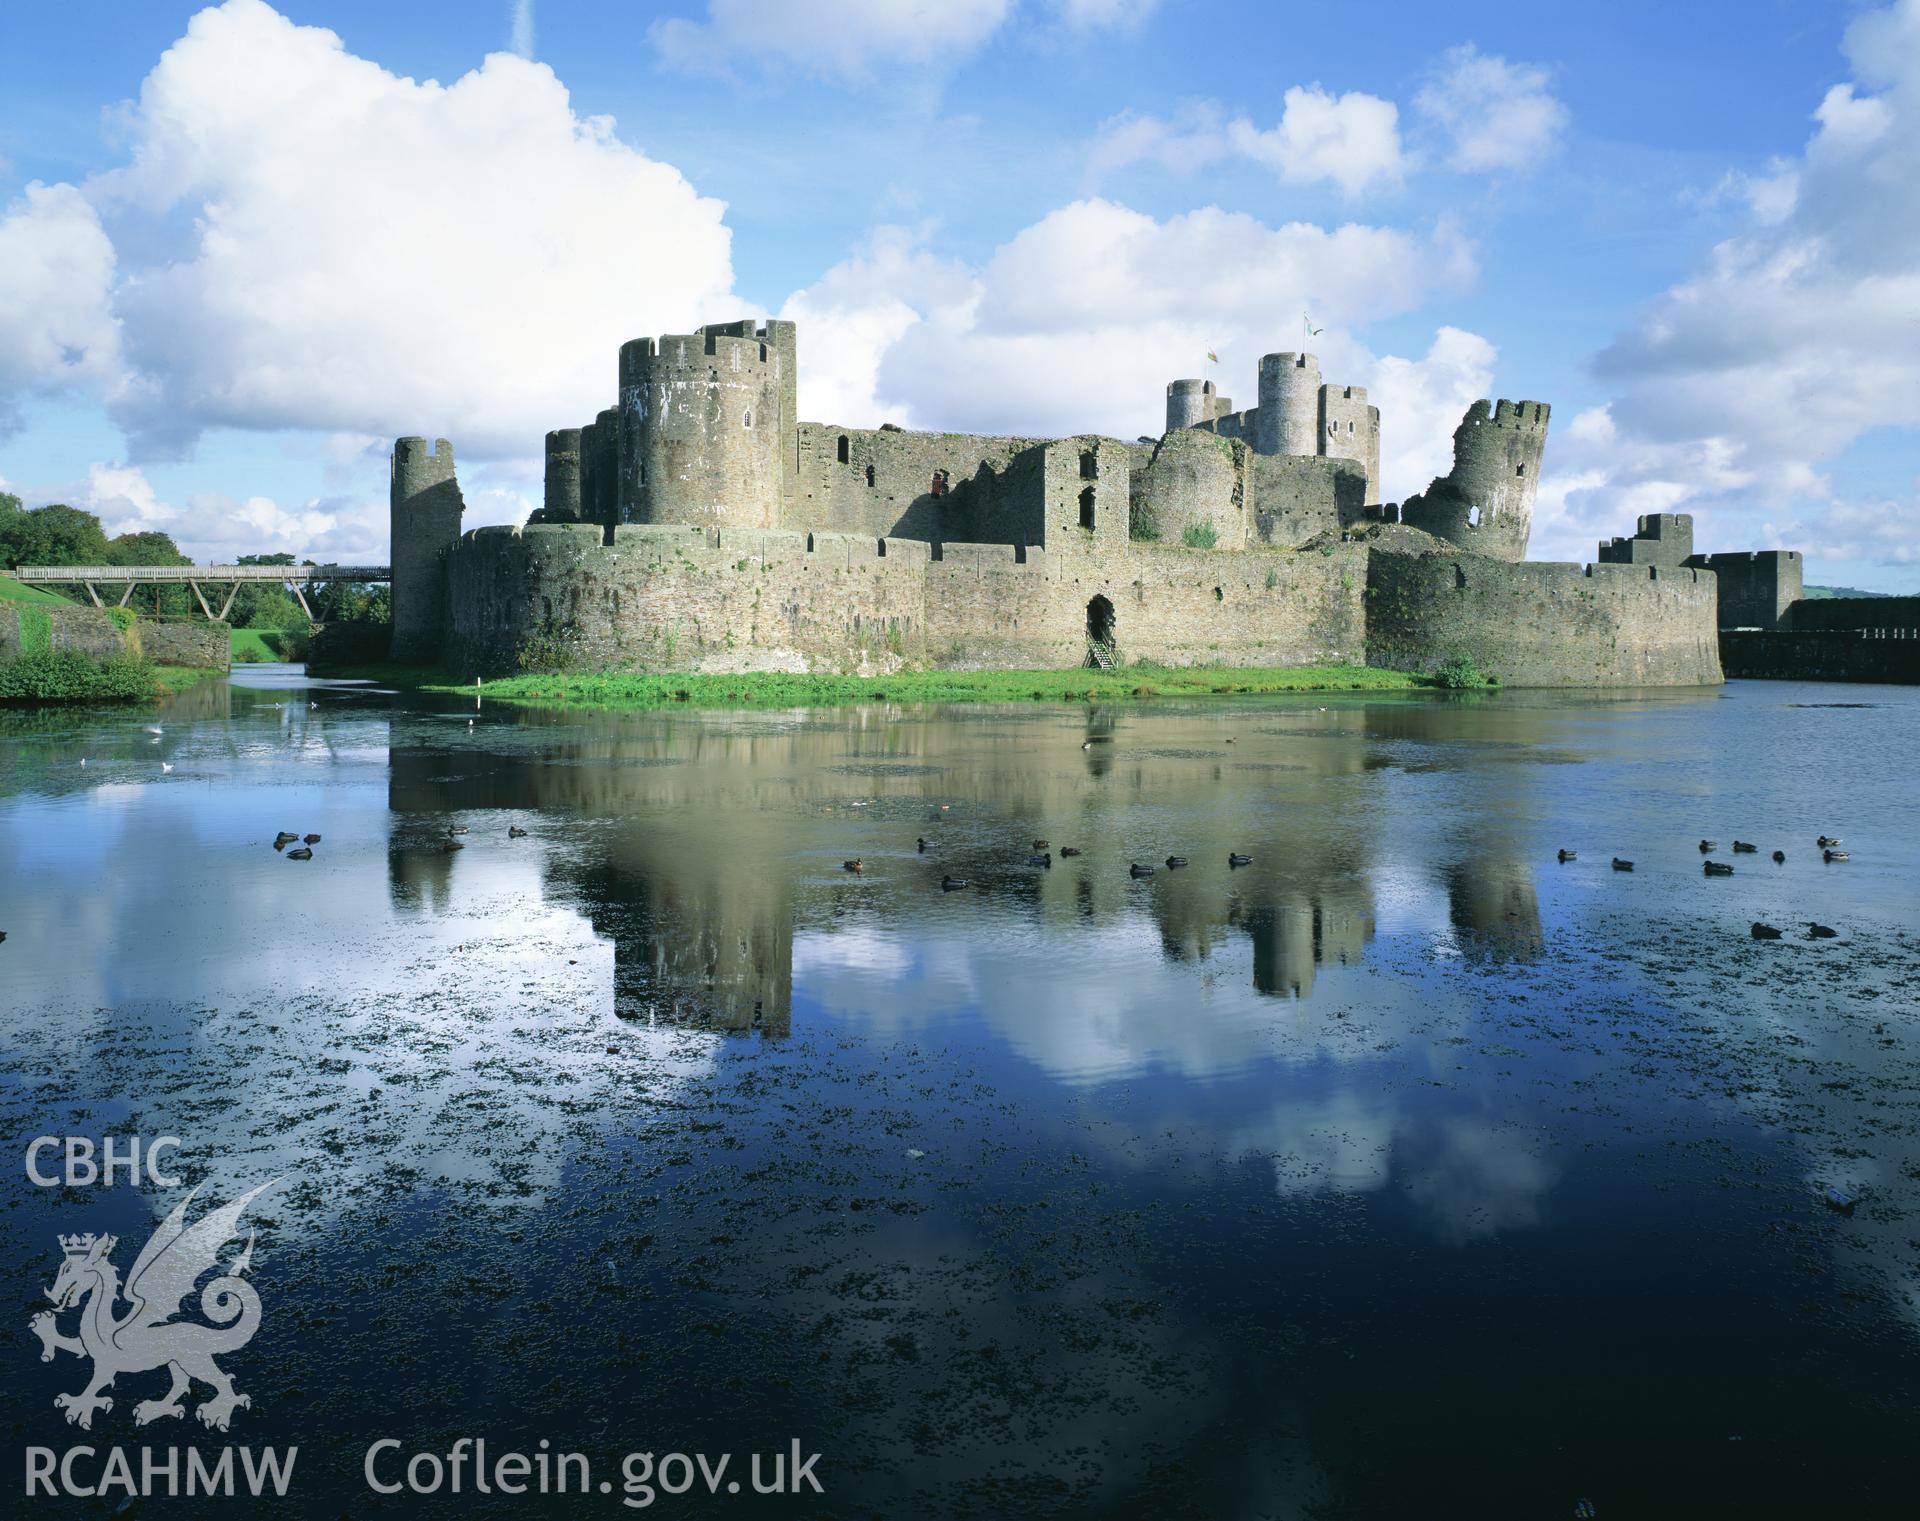 Colour transparency showing view of Caerphilly Castle